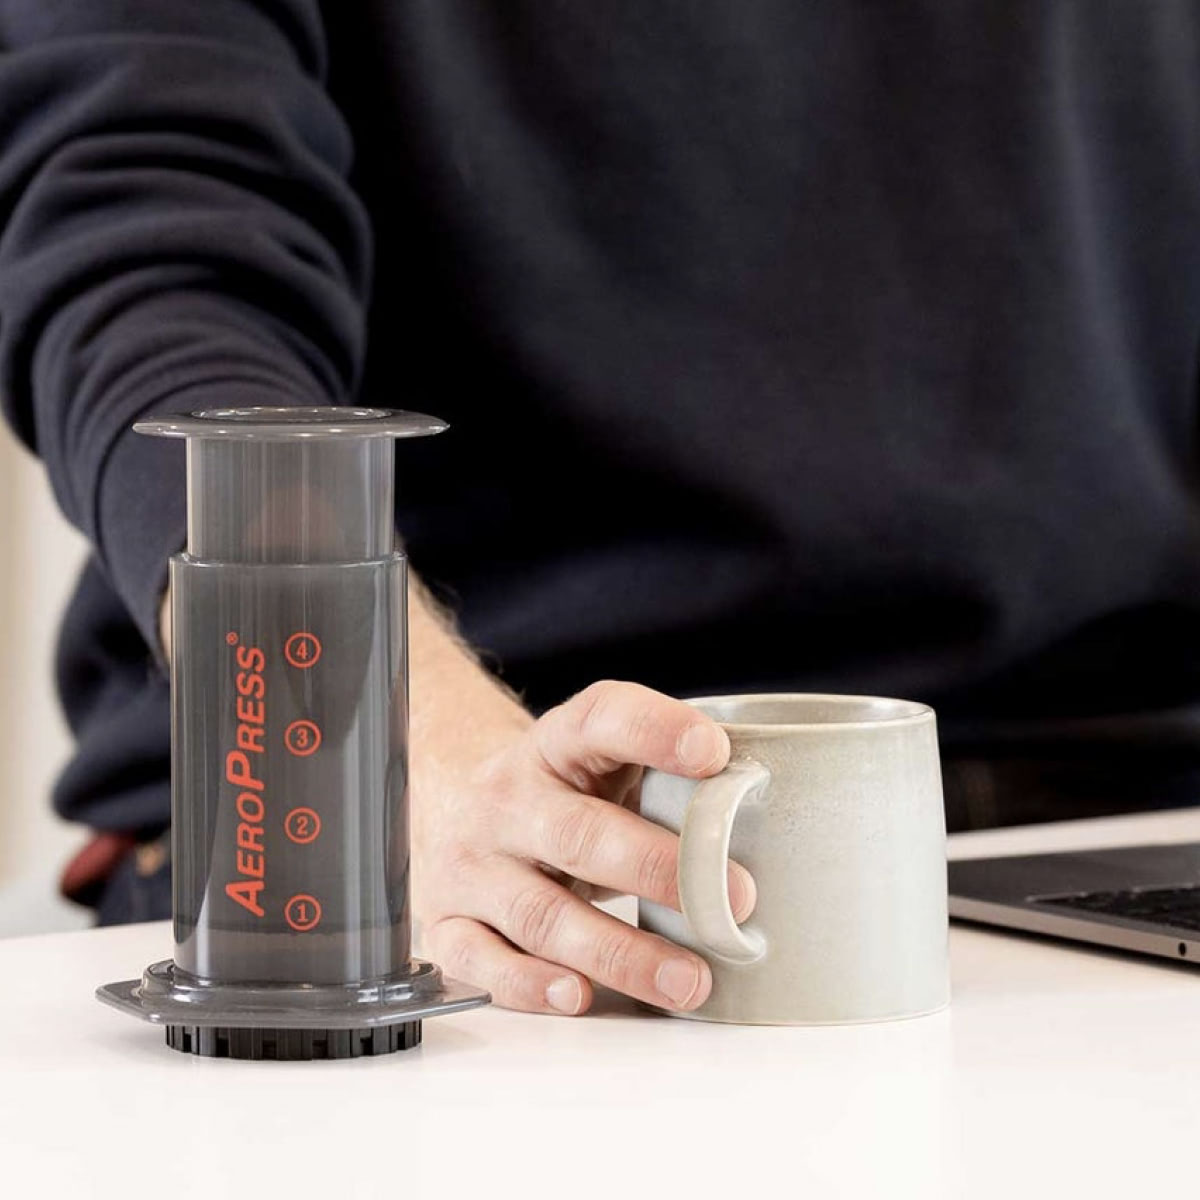 FAQs For The AeroPress Coffee Maker